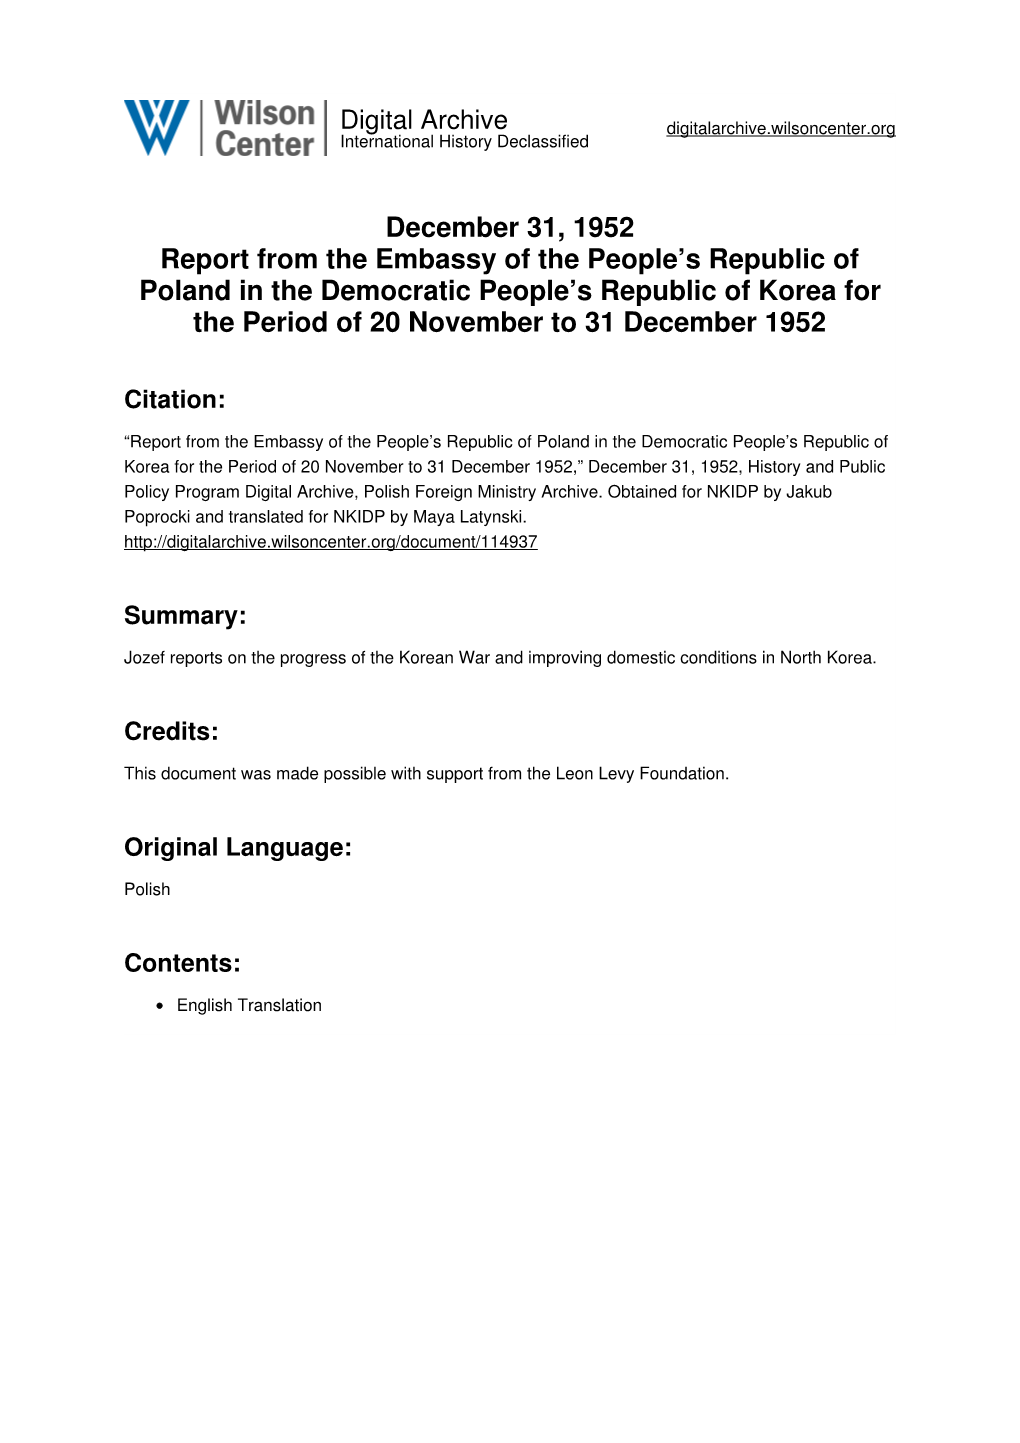 December 31, 1952 Report from the Embassy of the People's Republic